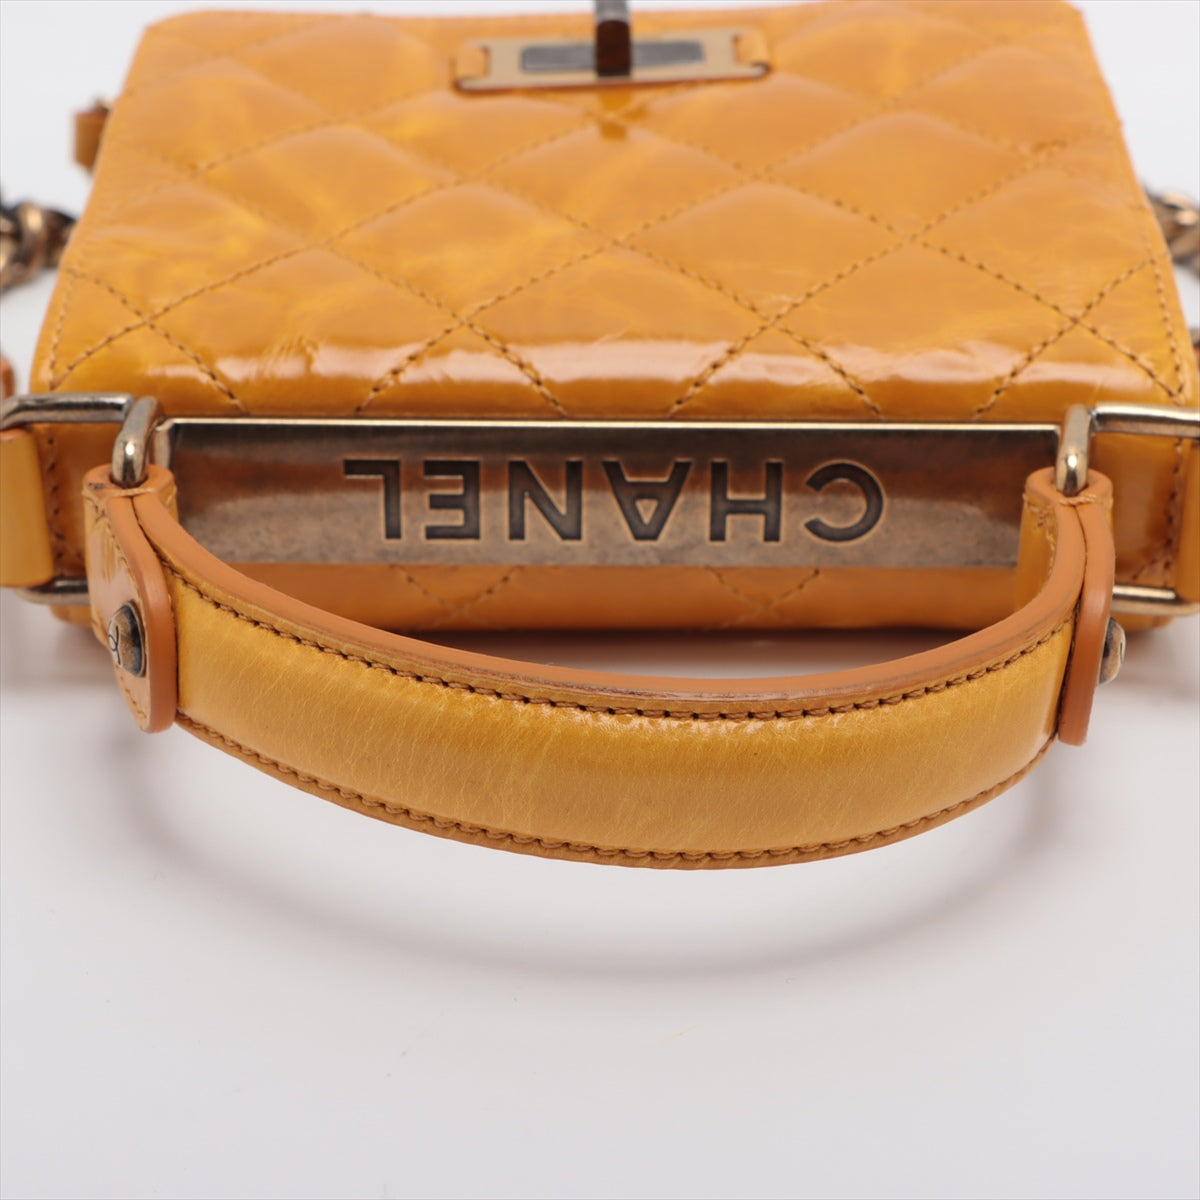 Chanel Matelasse Leather Chain Shoulder Bag 2.55 Yellow Gold Metal Fittings 15XXXXXX